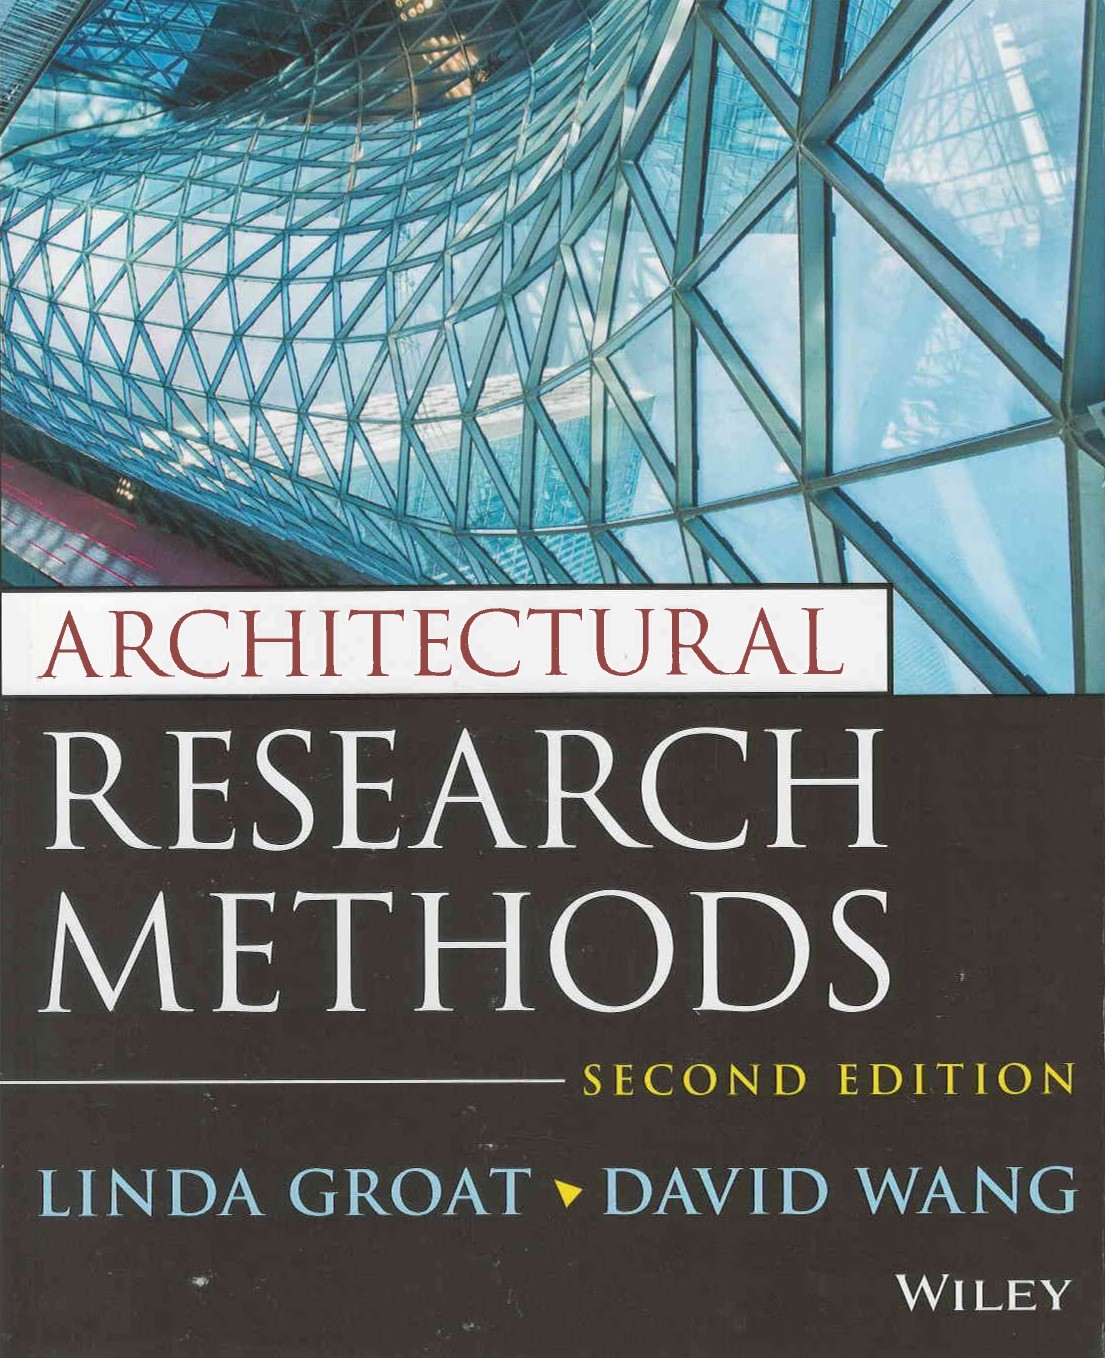 Architectural research methods